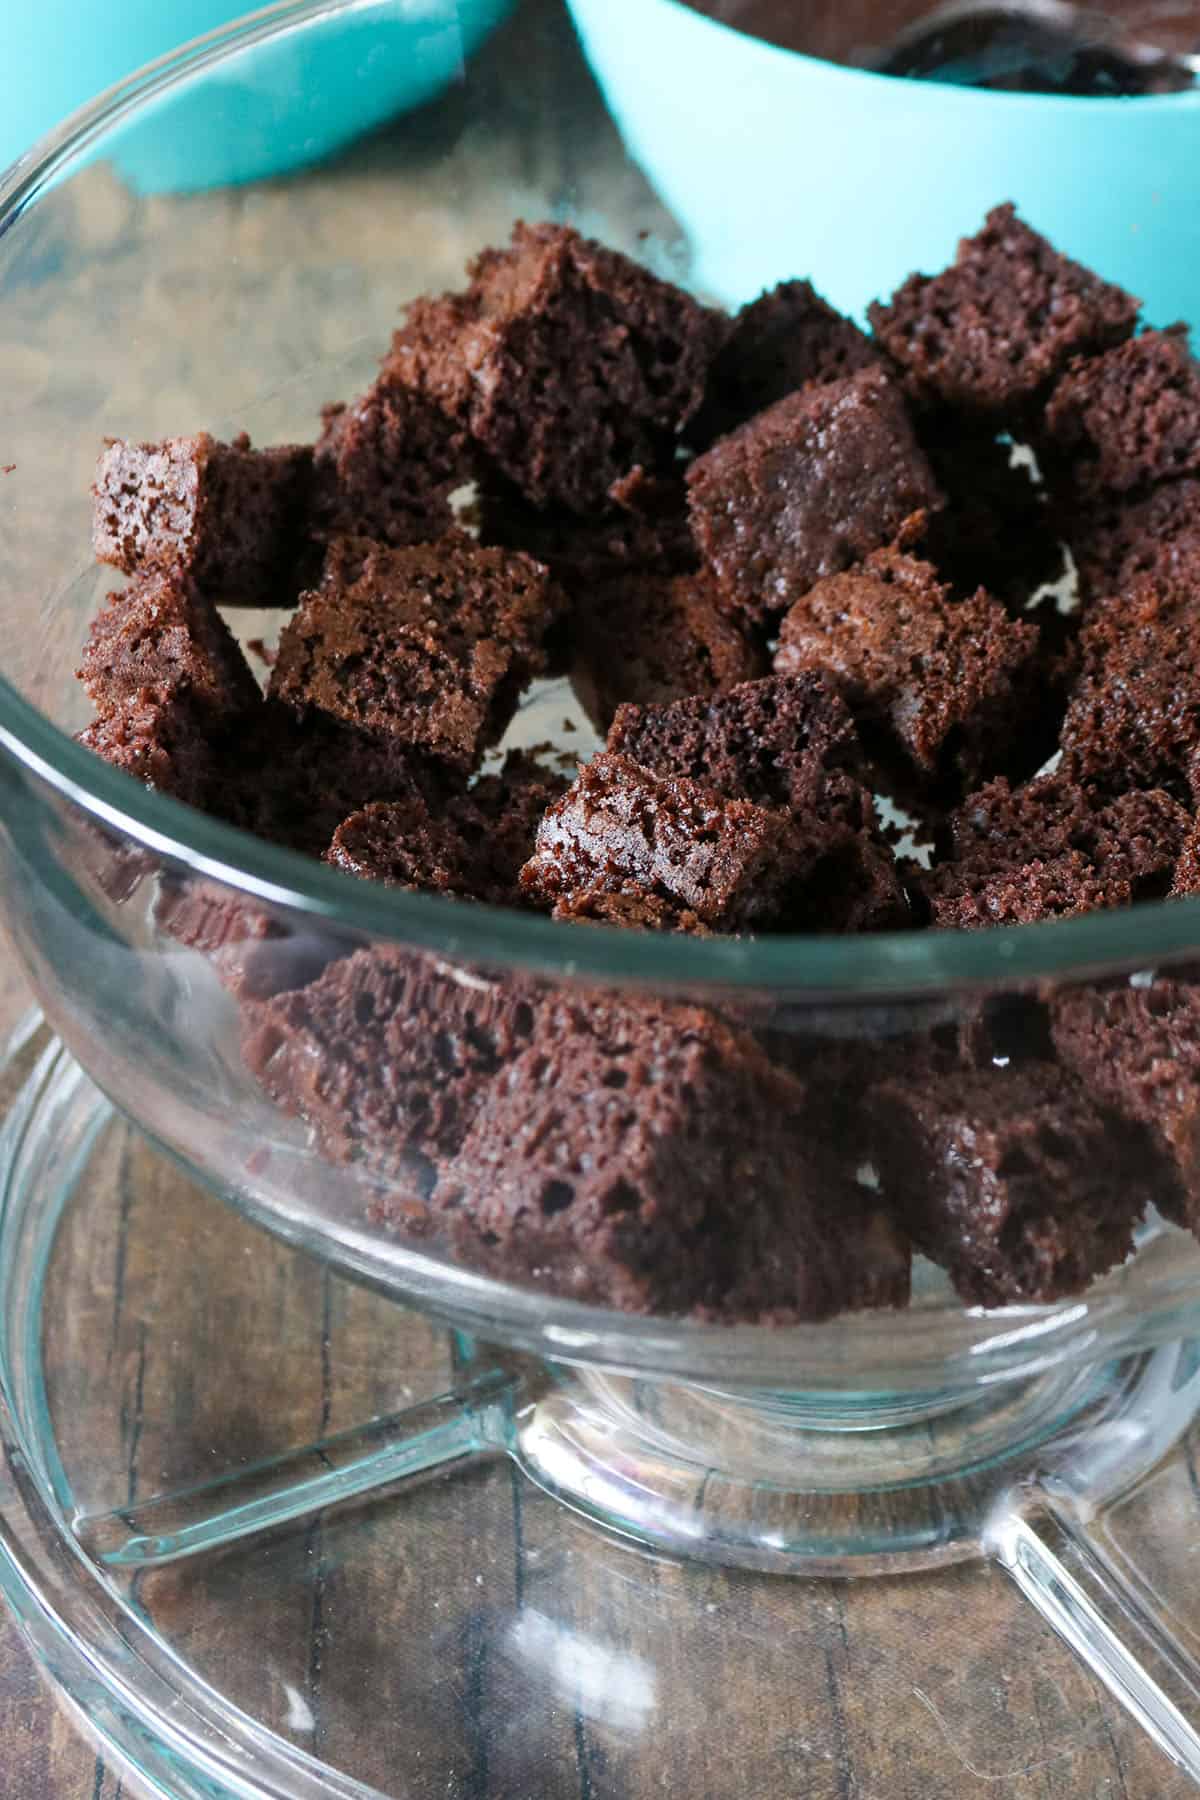 The chocolate cake cubes at the bottom of the bowl.